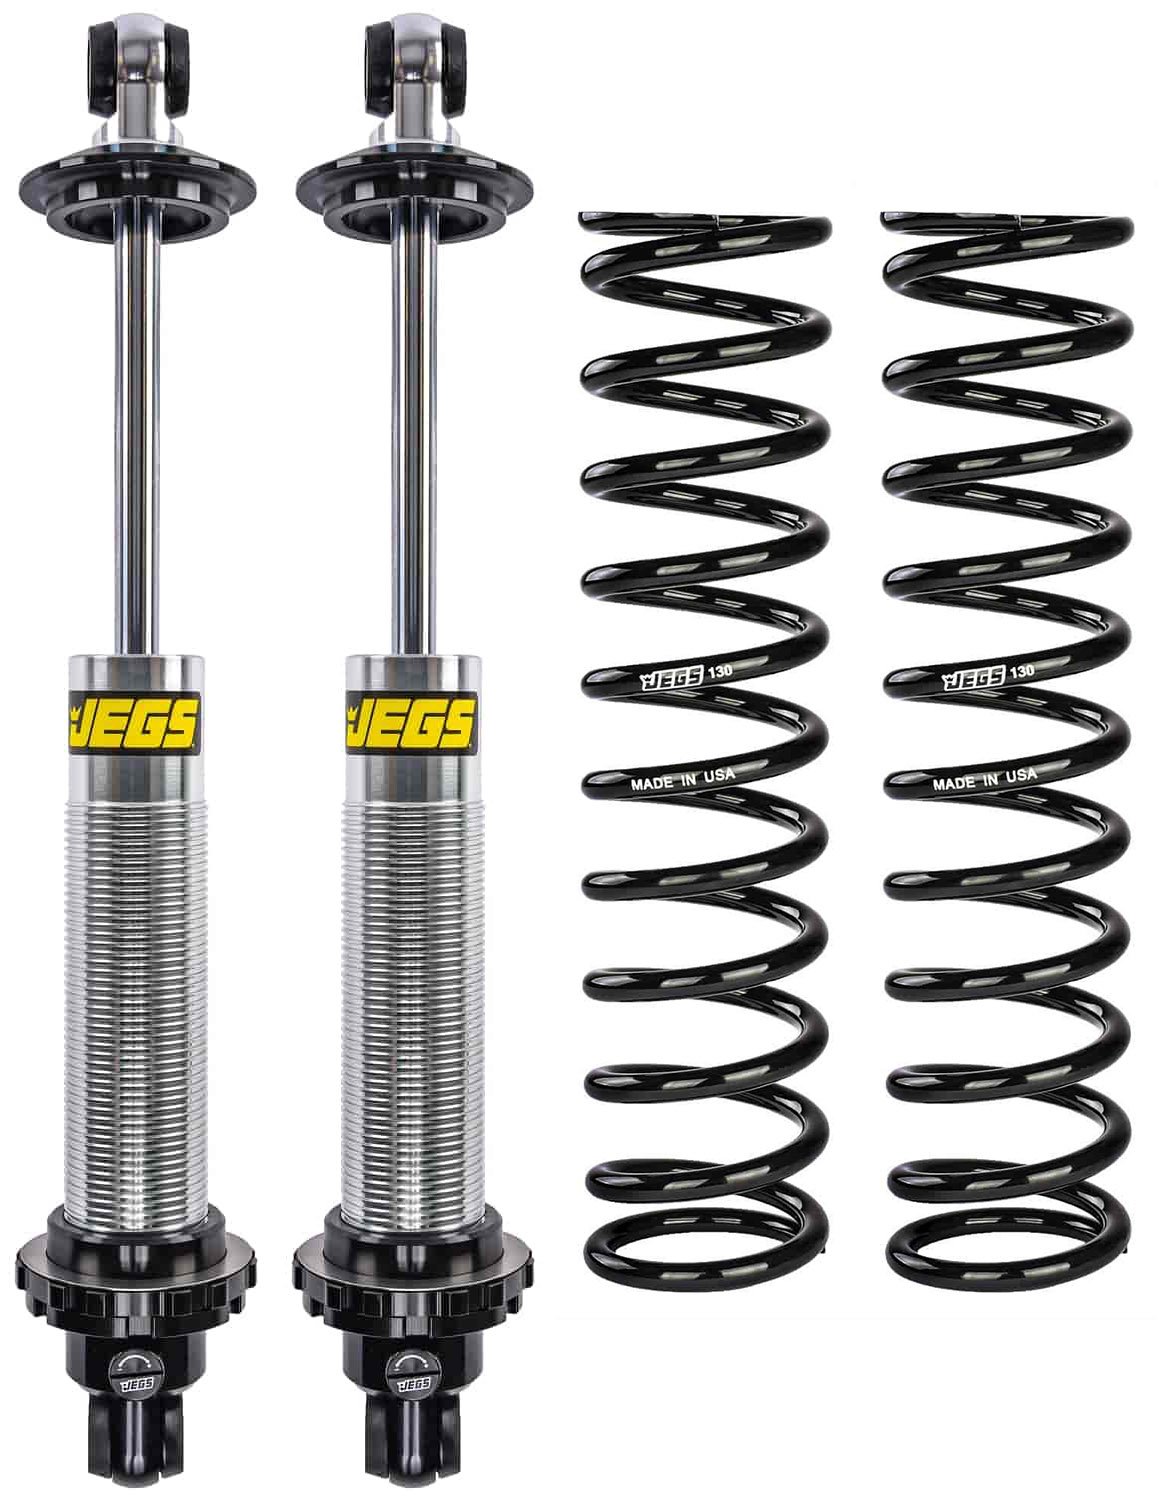 Single Adjustable Coil-Over Shocks and Coil-Over Springs Kit [14 in., 130 lbs./in. Springs]